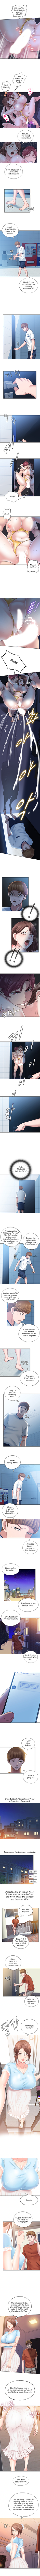 Water Overflow - Chapter 3 Page 3